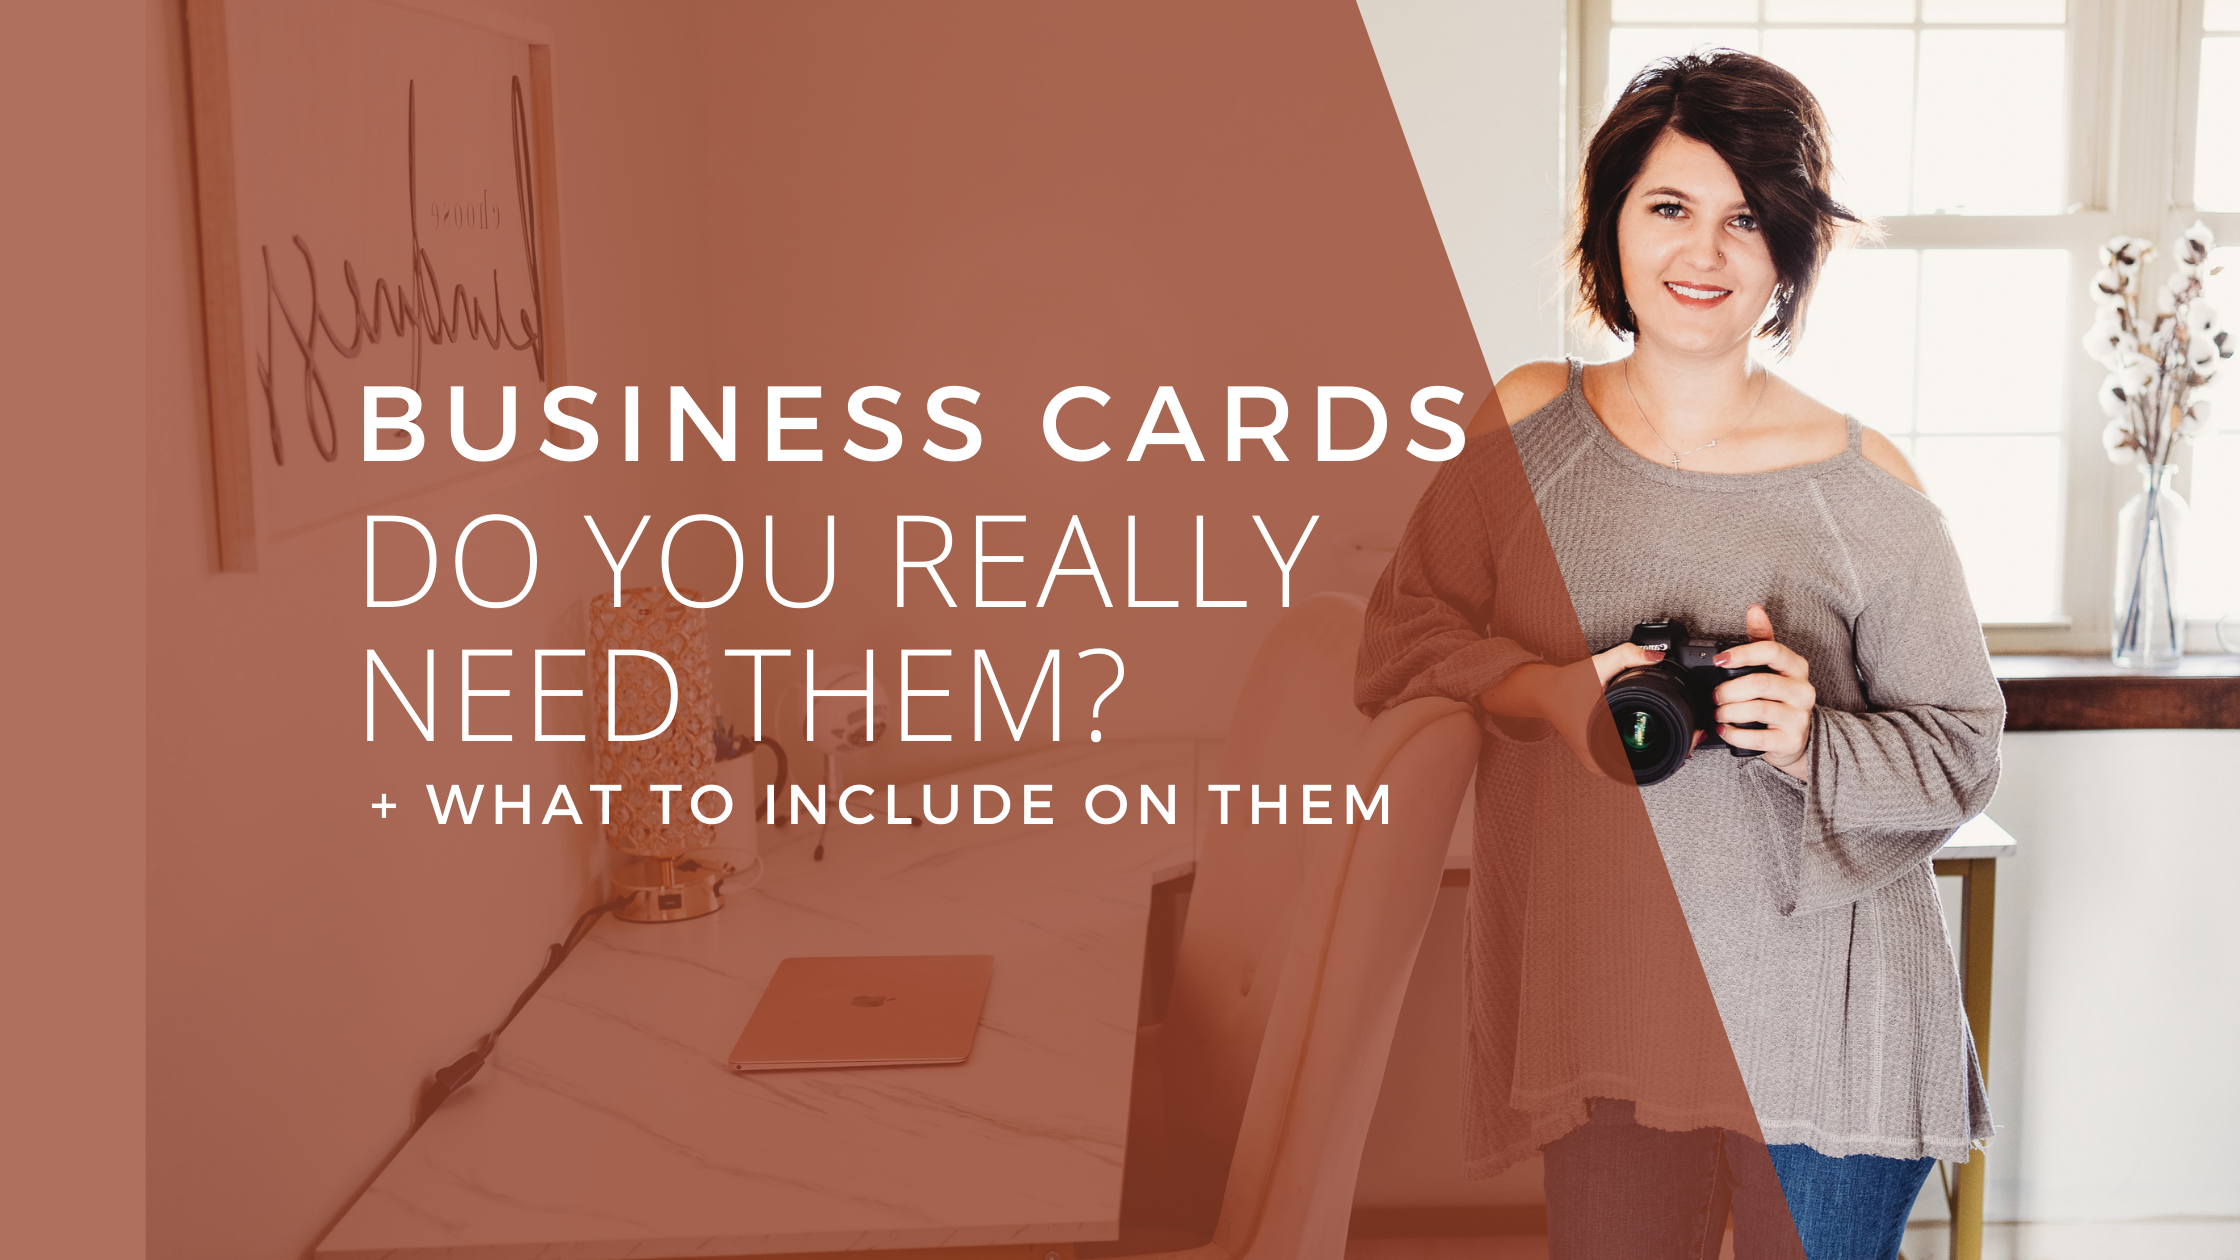 Business Cards. Do You Really Need Them? - brookejefferson.com